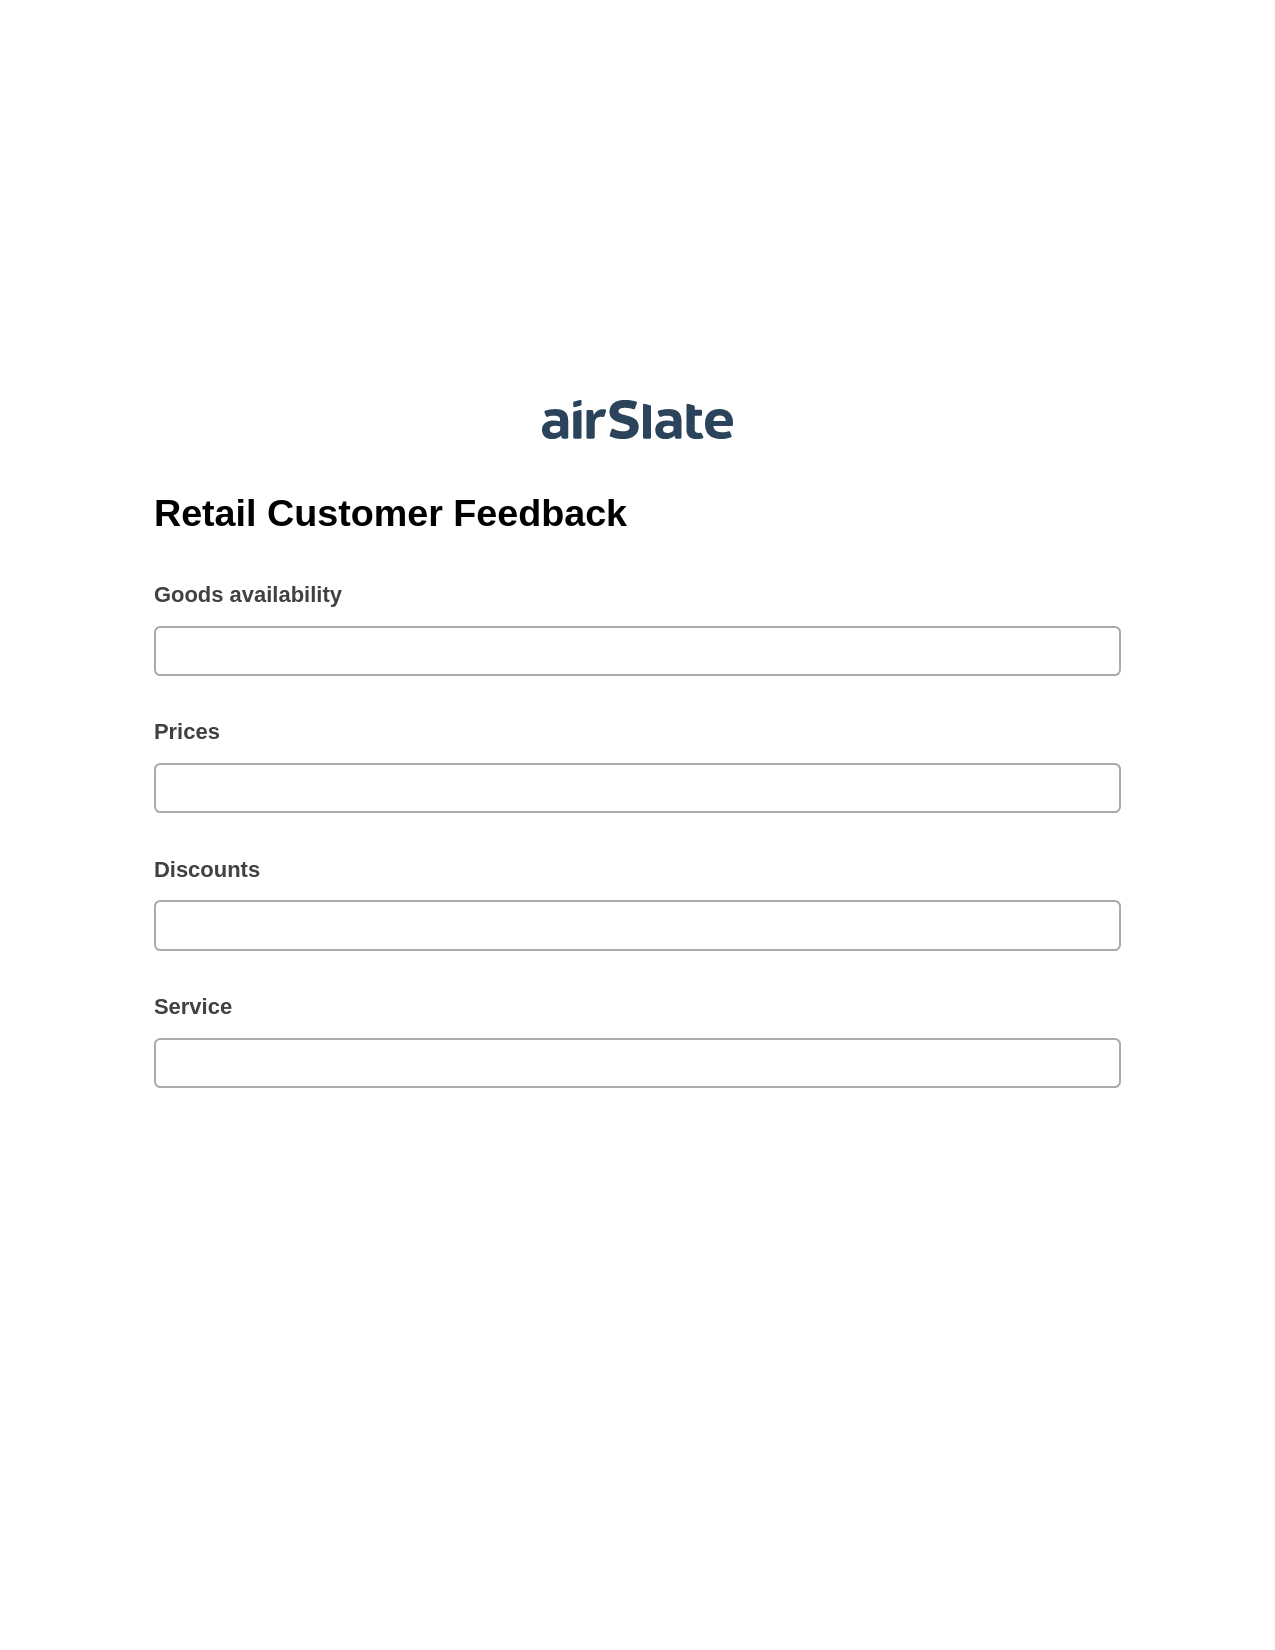 Retail Customer Feedback Pre-fill from Salesforce Record Bot, SendGrid send Campaign bot, Export to Excel 365 Bot